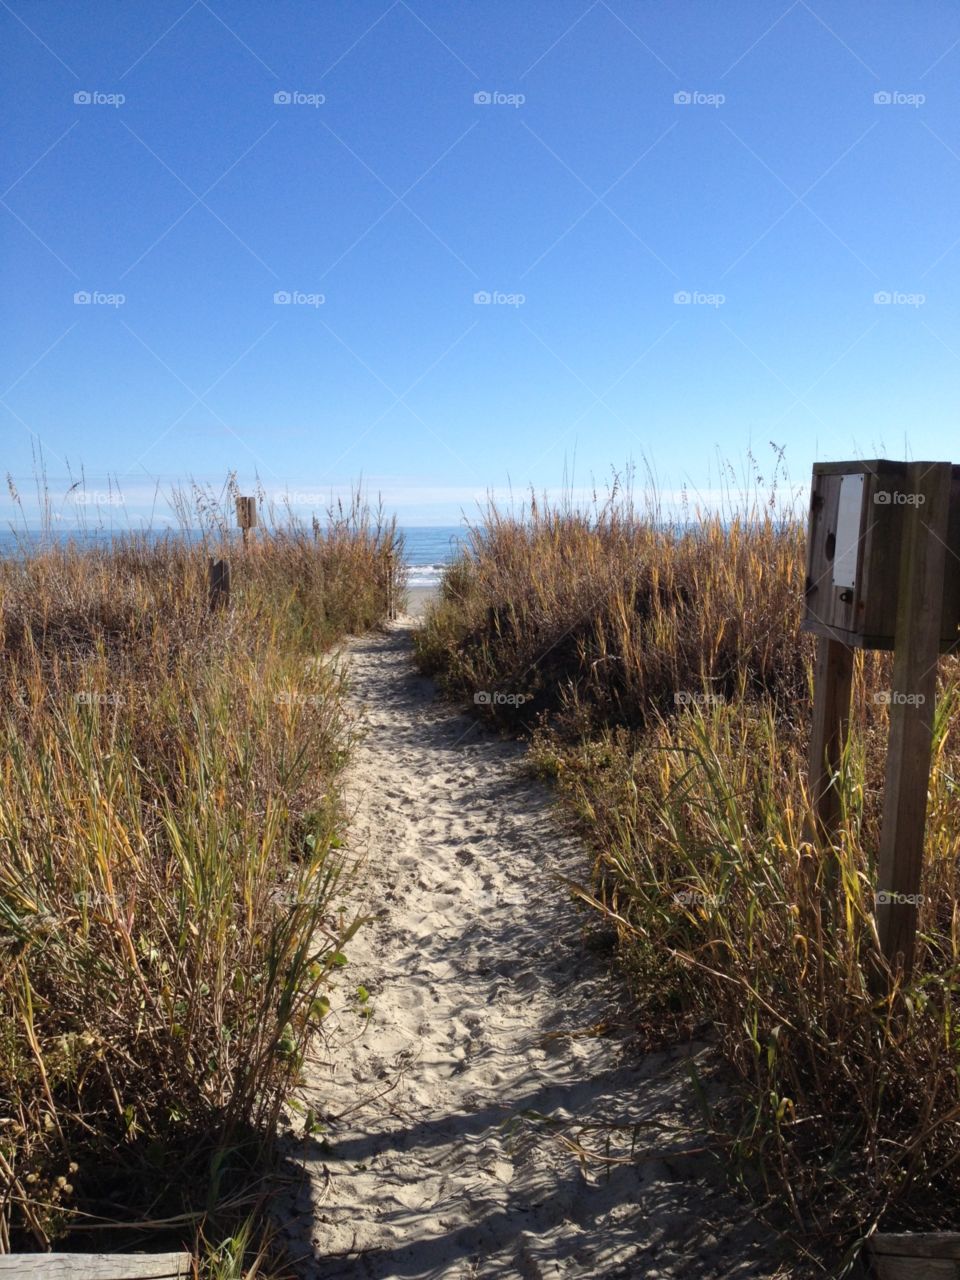 Seagrass by the beach . Seagrass by the ocean in North Myrtle Beach